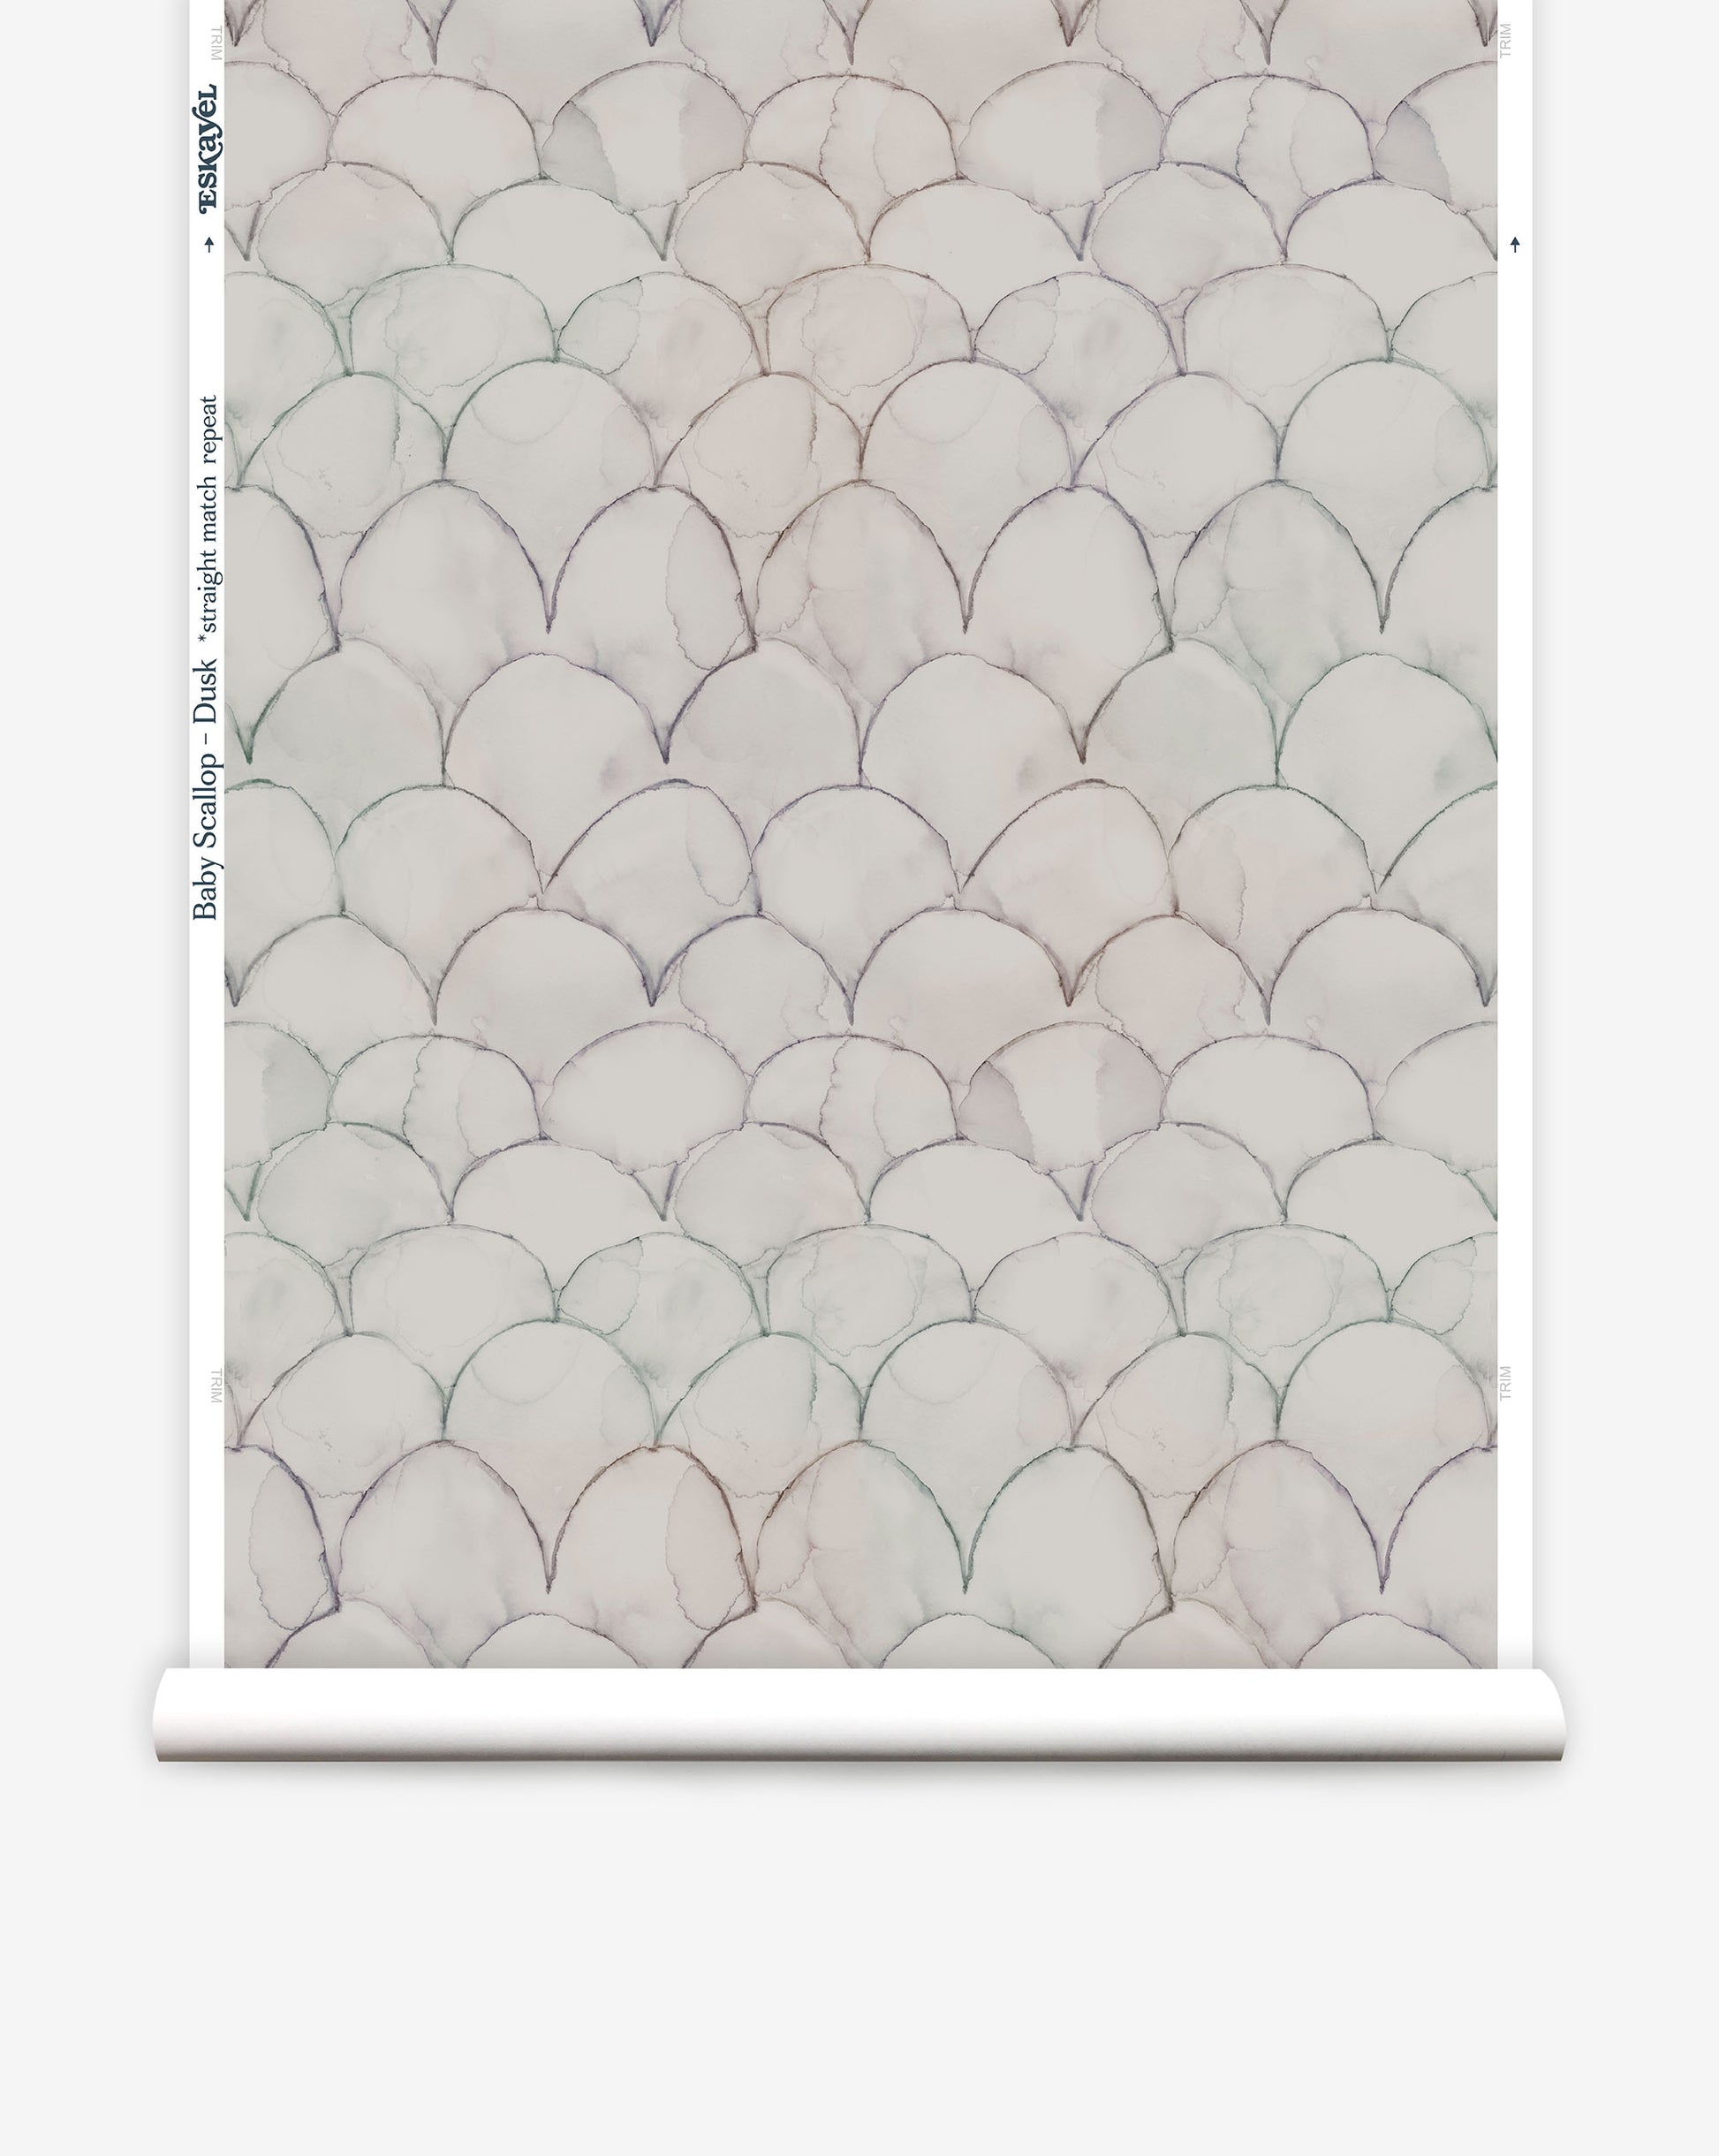 In Baby Scallops custom wallpaper in Dusk, neutrals meet hints of subtle color in a pattern of overlapping curves